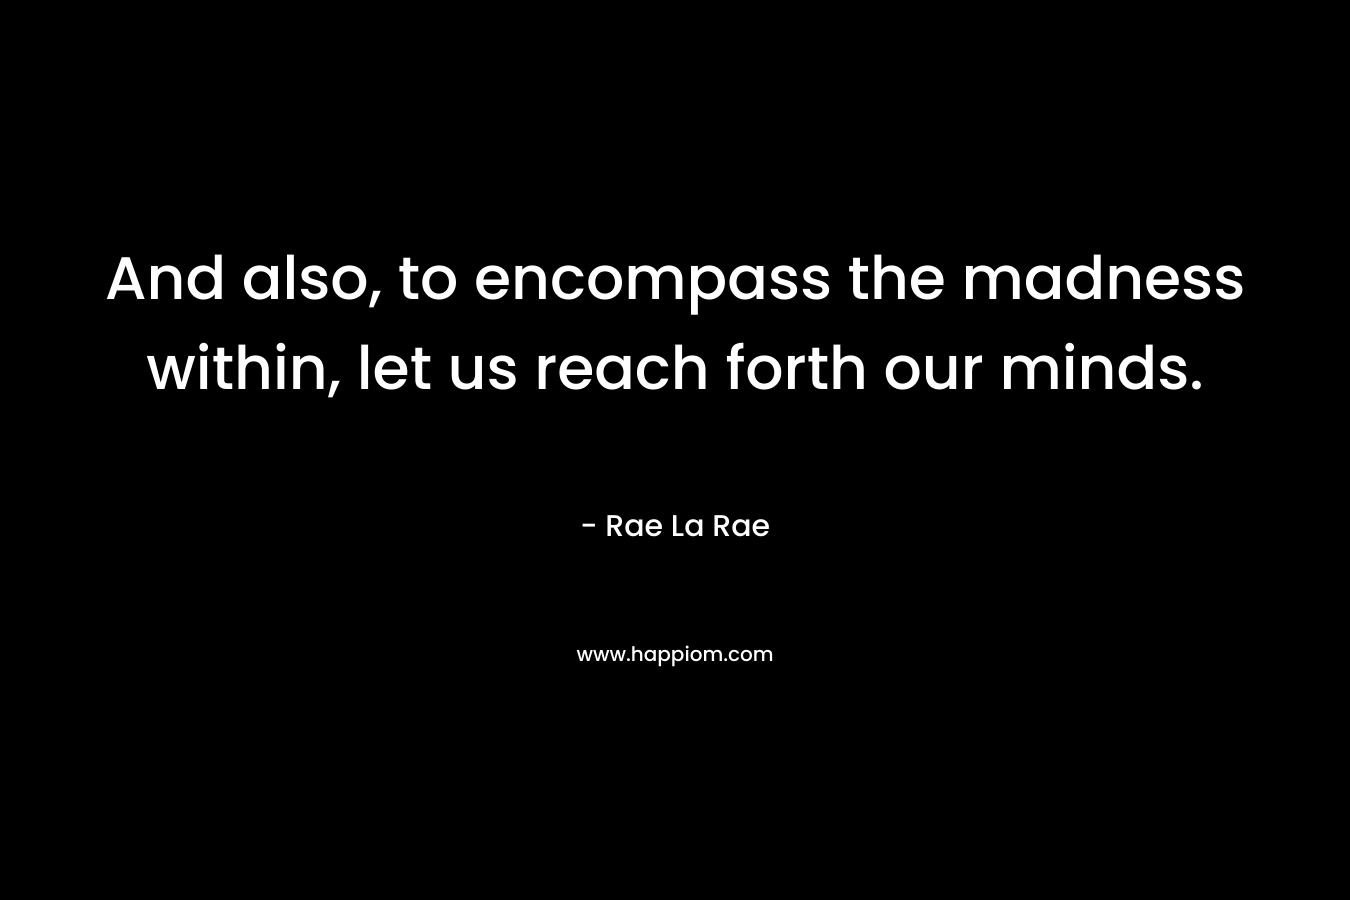 And also, to encompass the madness within, let us reach forth our minds. – Rae La Rae